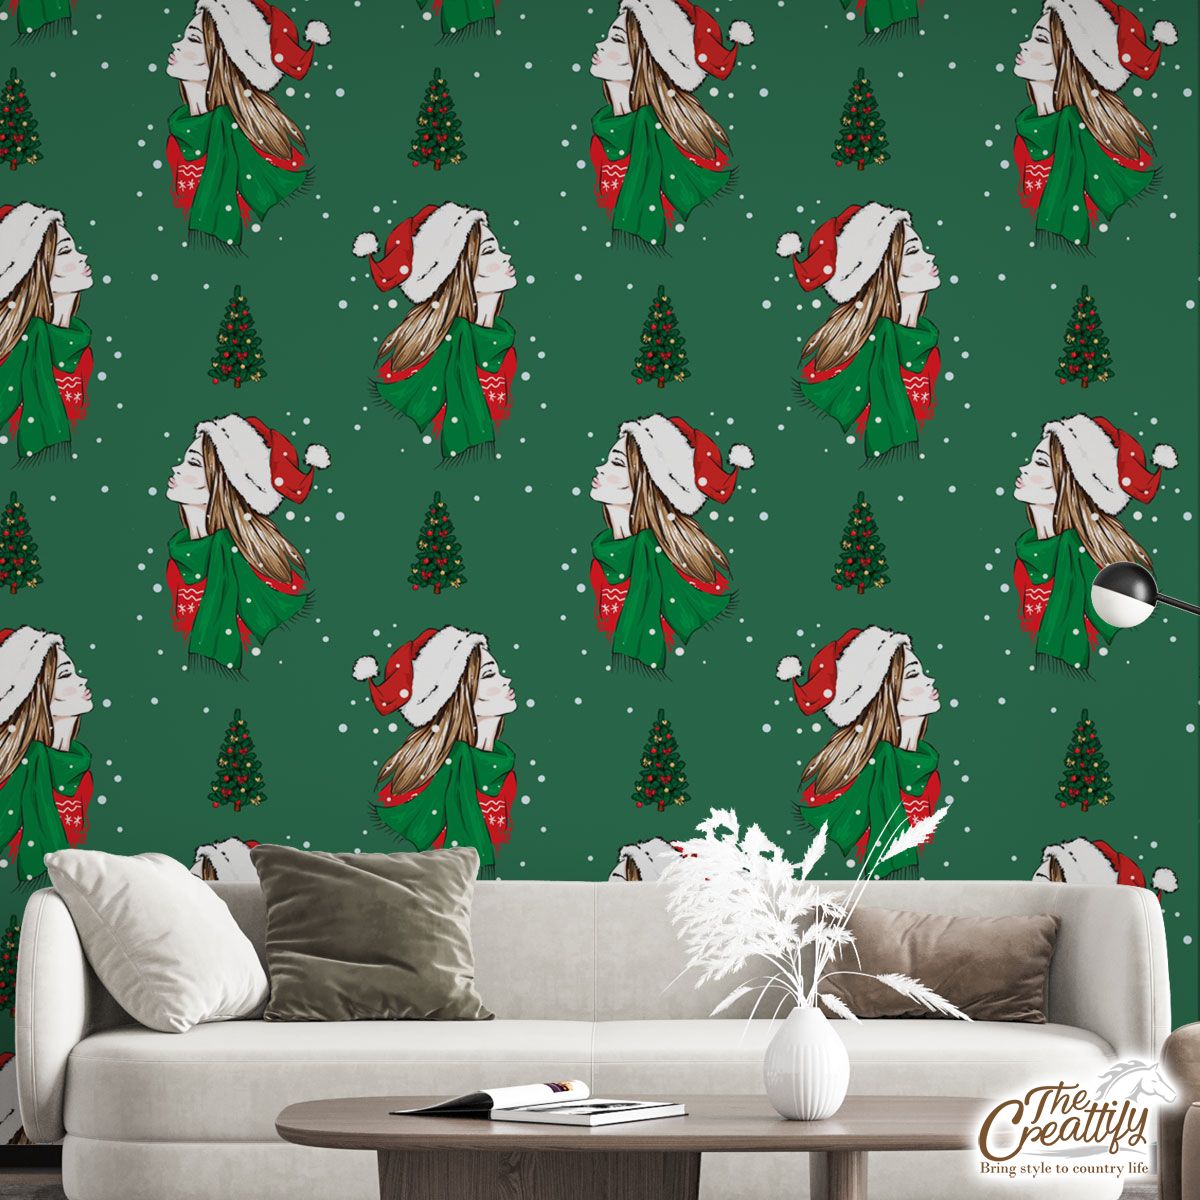 Christmas Girls With Christmas Tree On Green Background Wall Mural